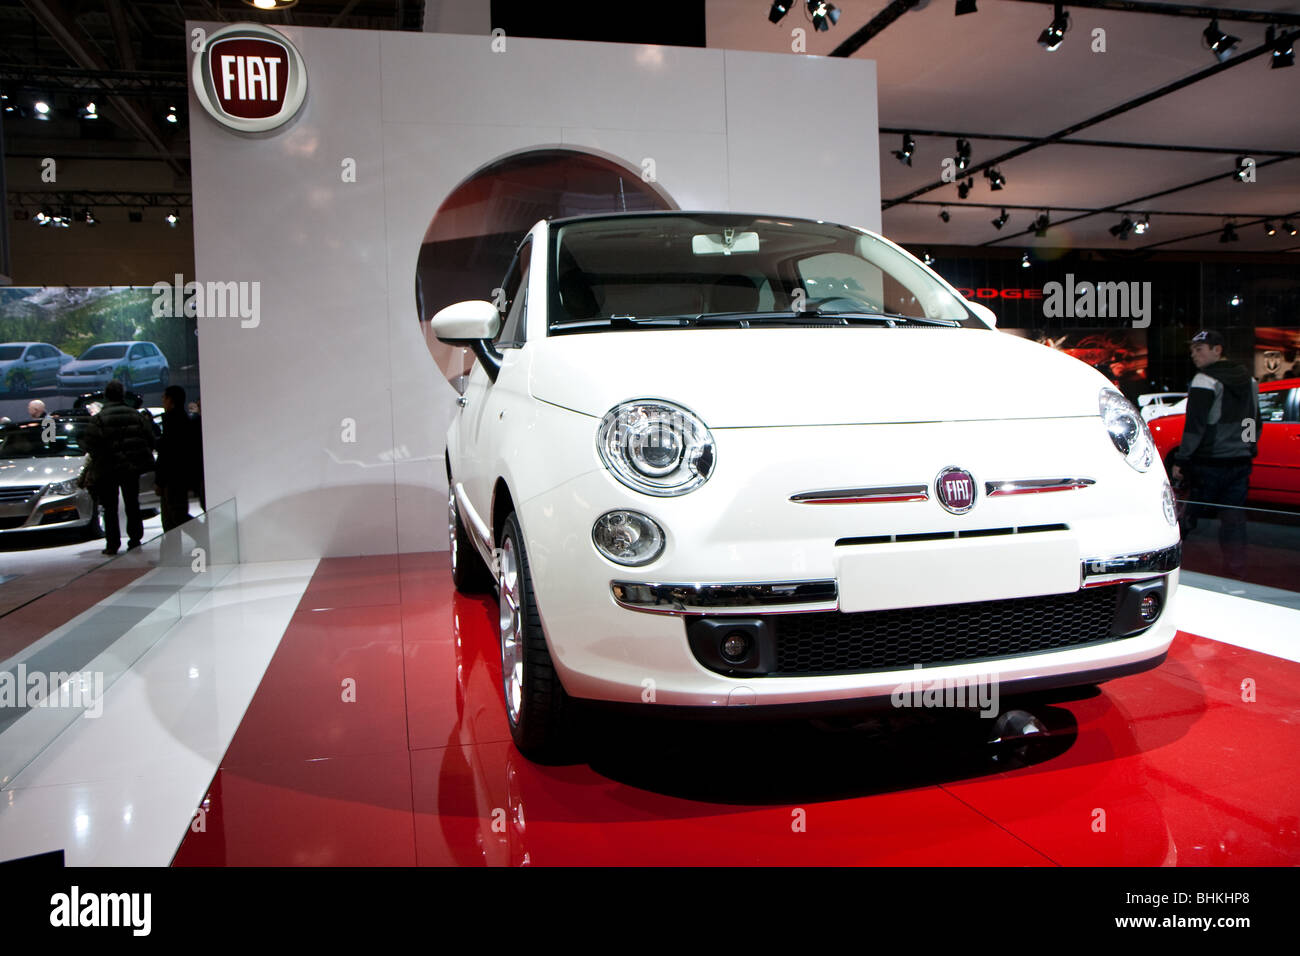 Fiat 500 front view Stock Photo - Alamy